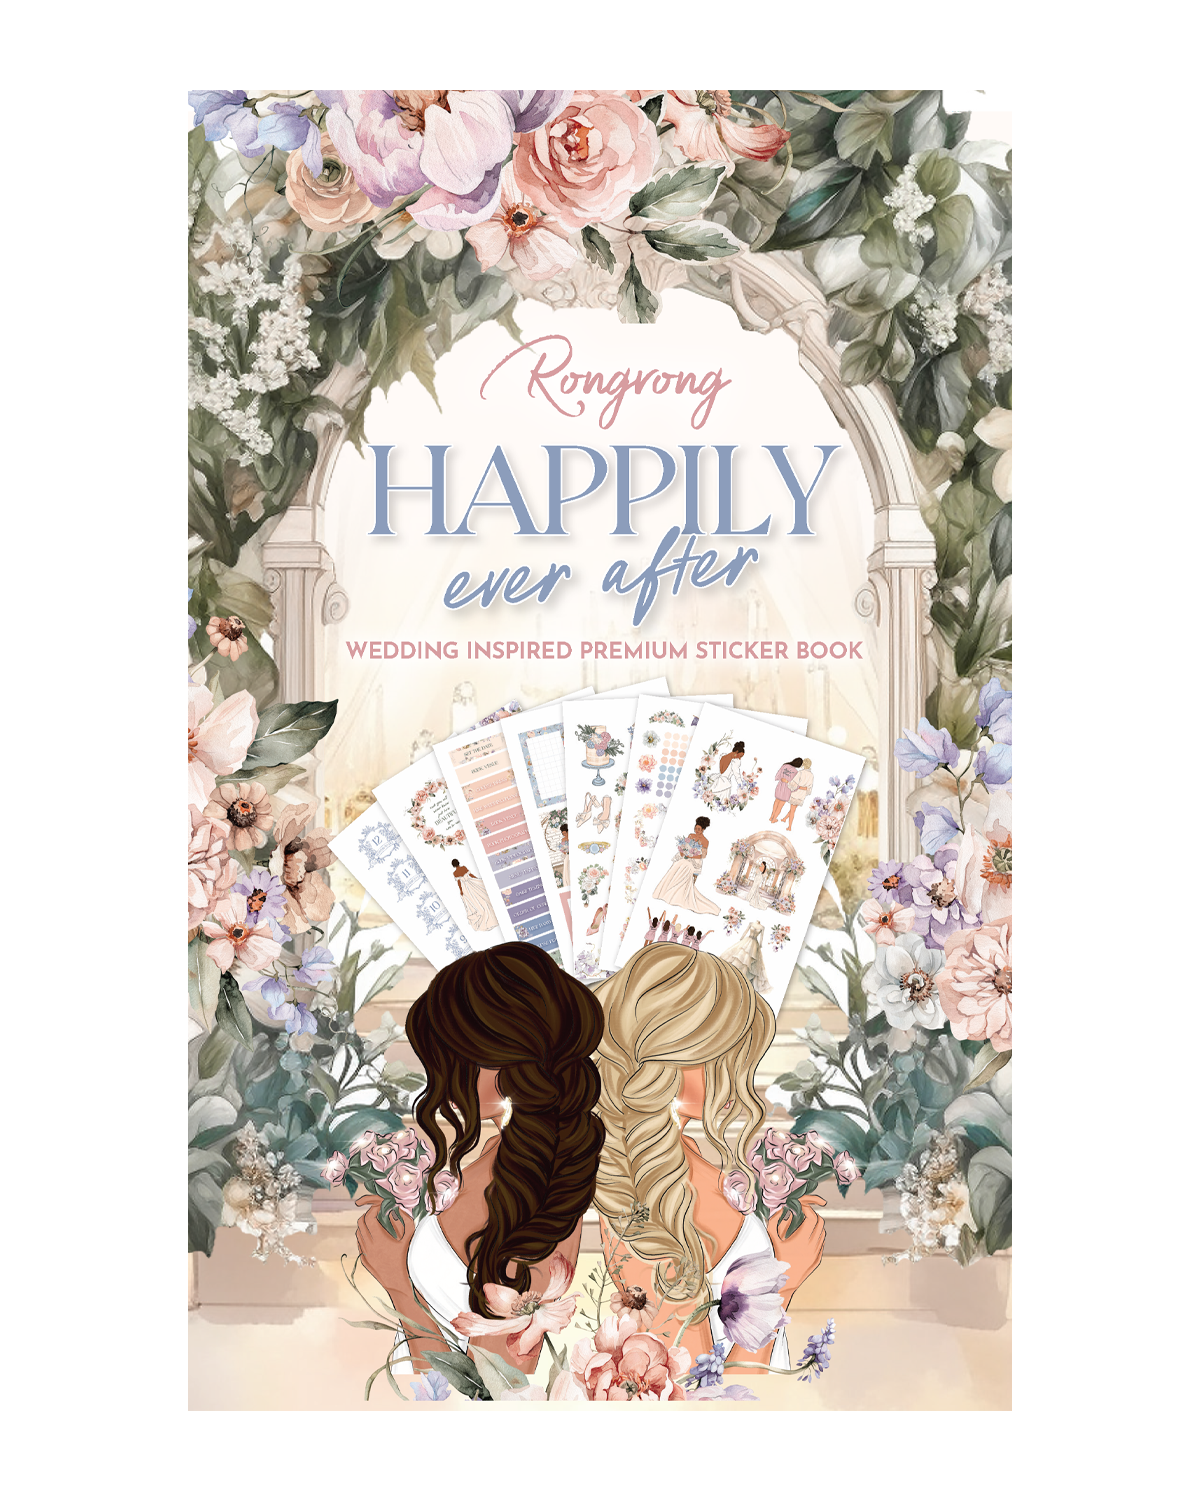 Happily Ever After Wedding Sticker Book (Set of 6)